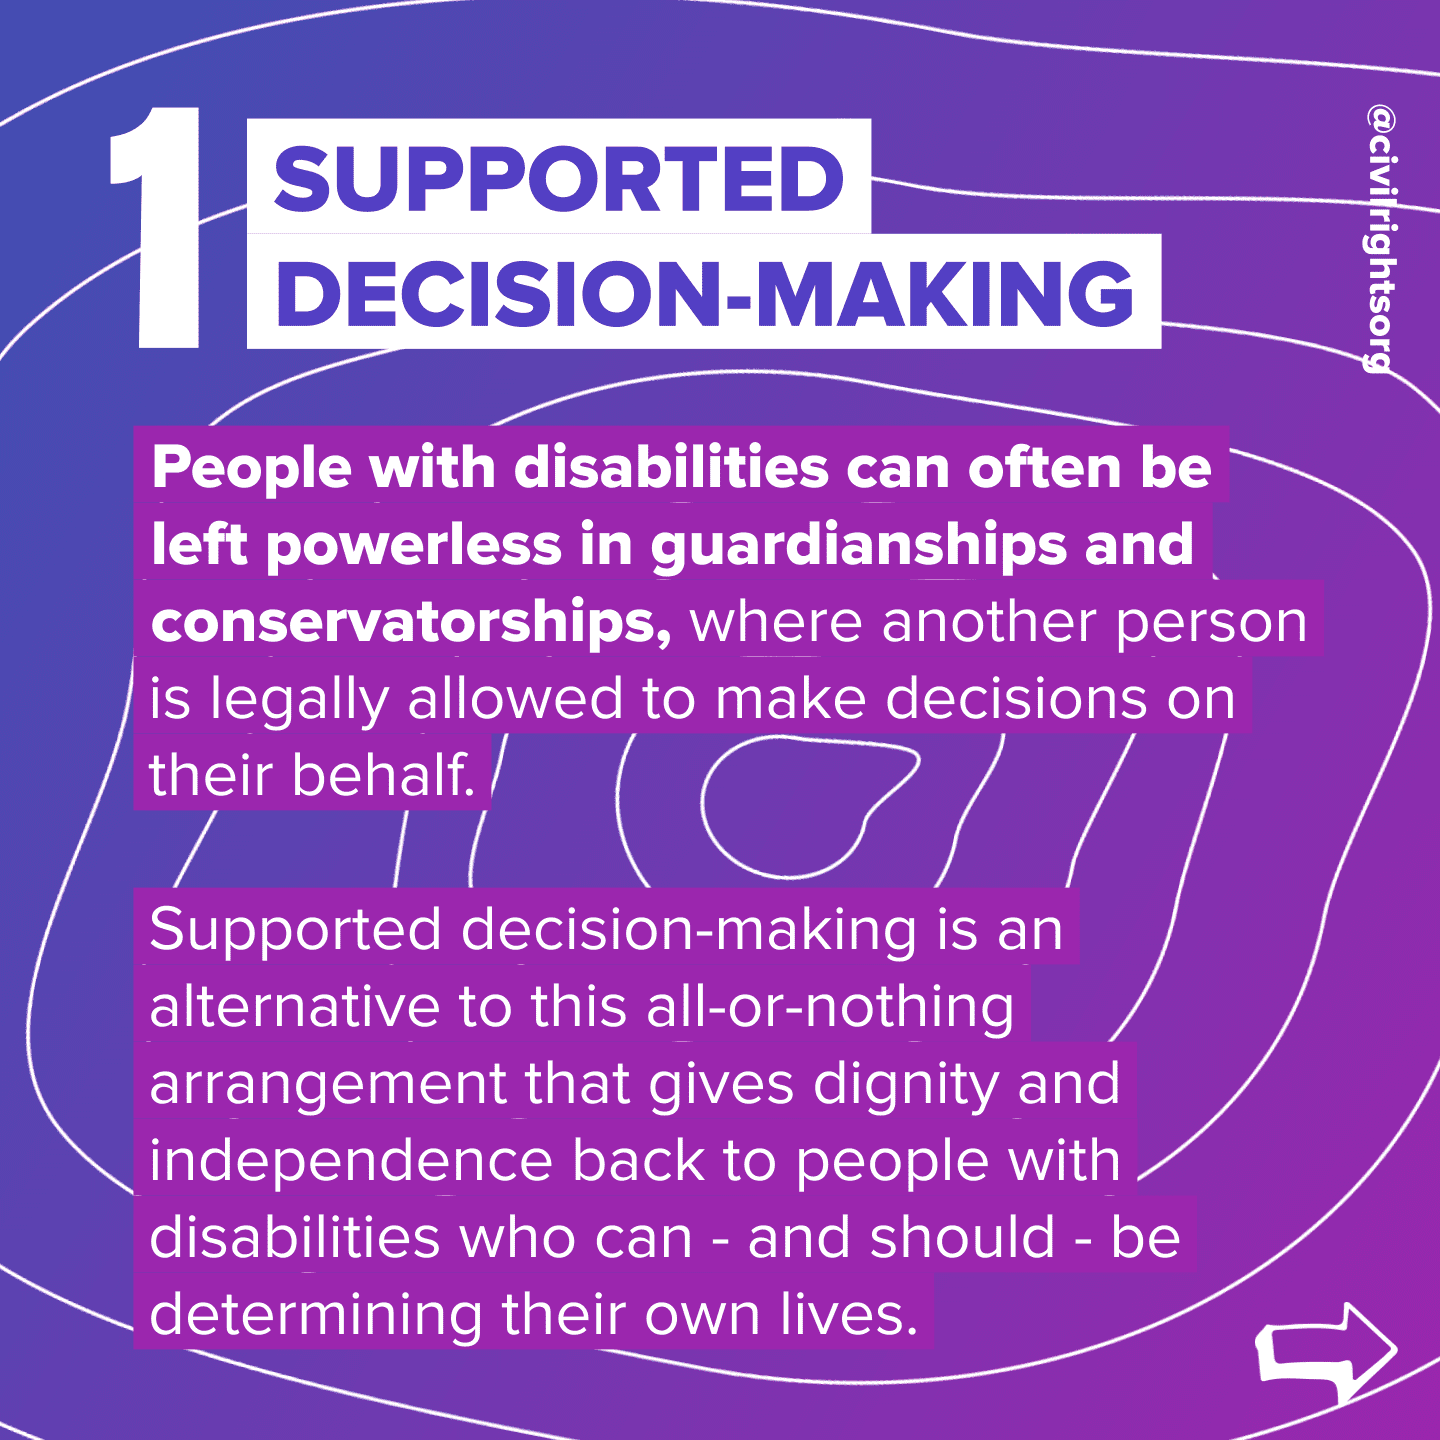 Number 1. Title “Supported Decision-Making,” People with disabilities can often be left powerless in guardianships and conservatorships, where another person is legally allowed to make decisions on their behalf. Supported decision-making is an alternative to this all-or-nothing arrangement that gives dignity and independence back to people with disabilities who can - and should - be determining their own lives. Swipe right arrow.